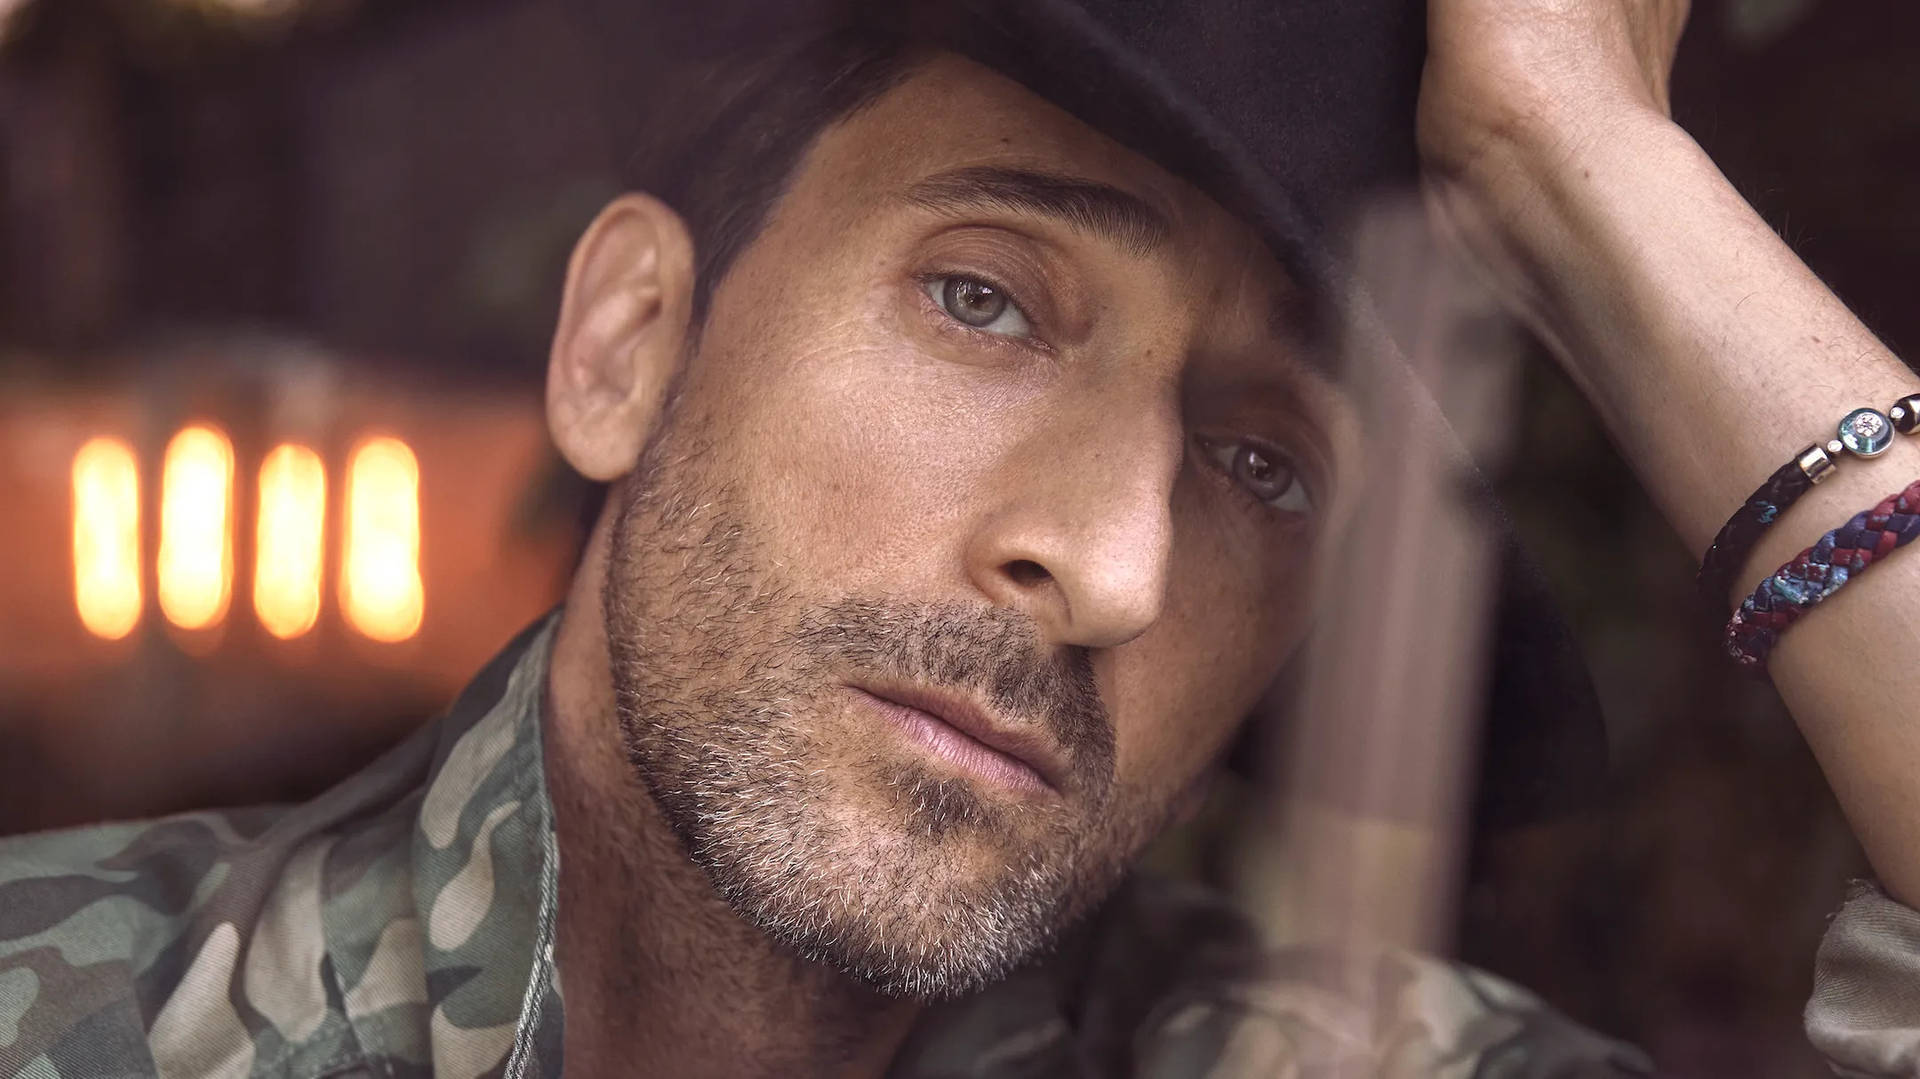 Award-winning Actor Adrien Brody In A Close-up Shot